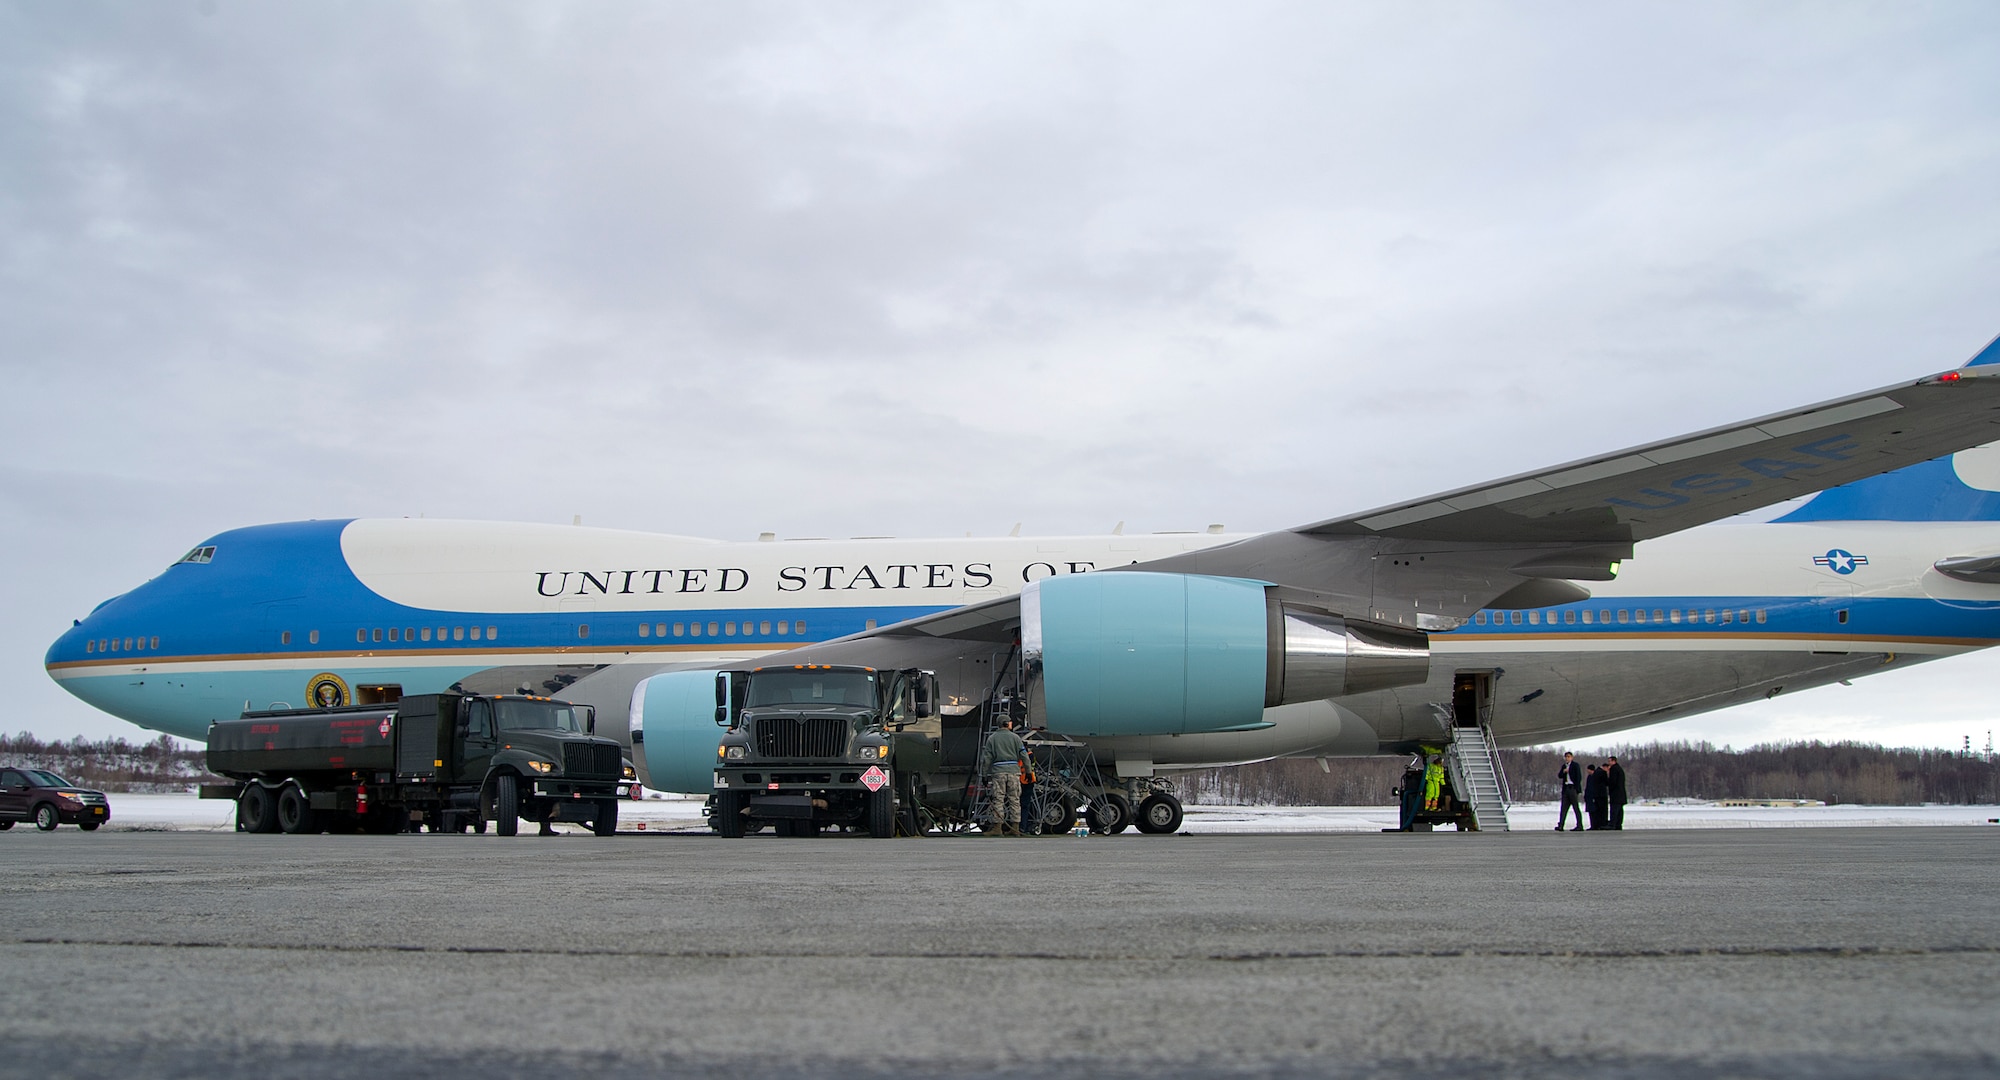 R-11 fuel trucks refuel Air Force One on Joint Base Elmendorf-Richardson March 27, 2012. The plane, carrying the President of the United States, landed on JBER to refuel after returning from a visit to the Republic of Korea. (U.S. Air Force photo/Staff Sgt. Zachary Wolf)